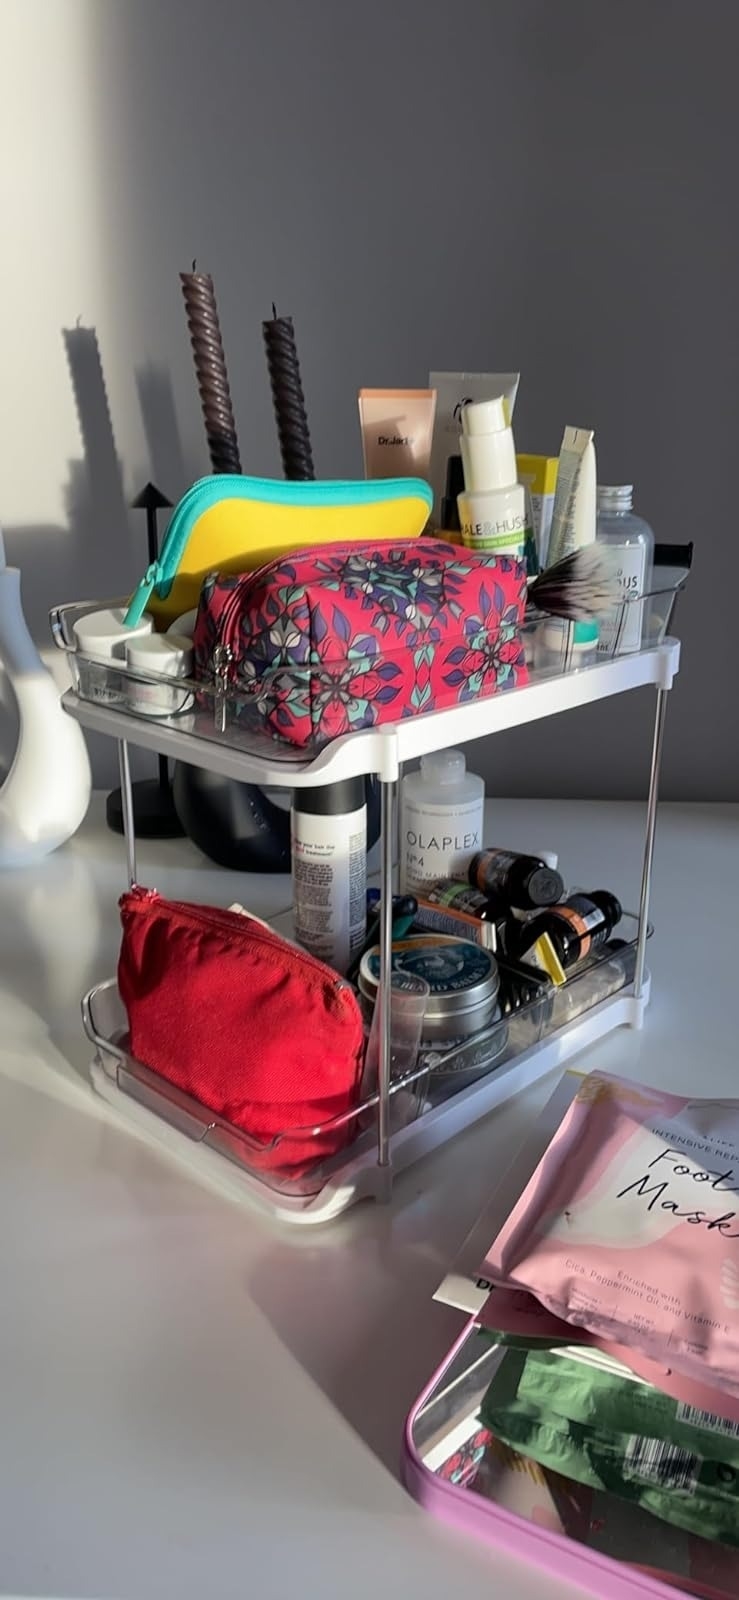 Transparent organizer with various skincare products and a patterned makeup bag on a vanity